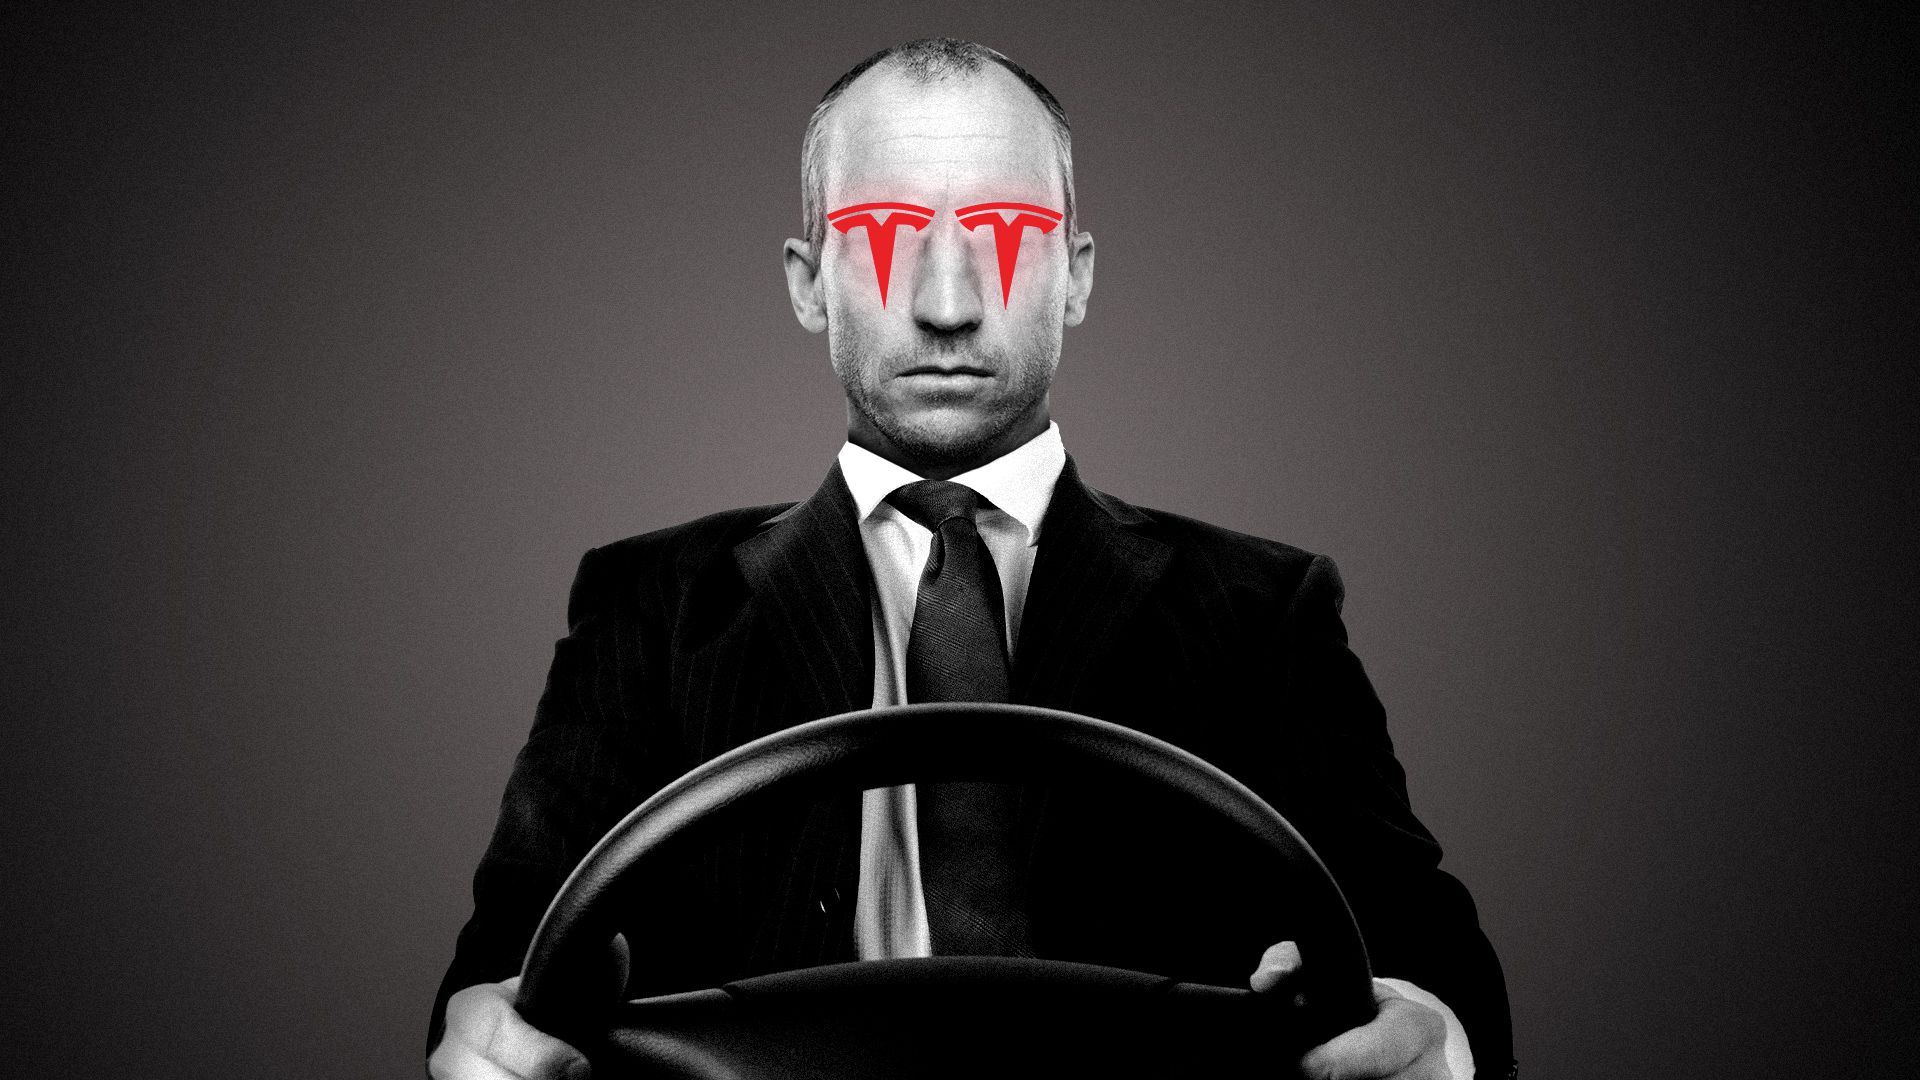 Illustration of a man behind a steering wheel with Tesla logos for eyes. 